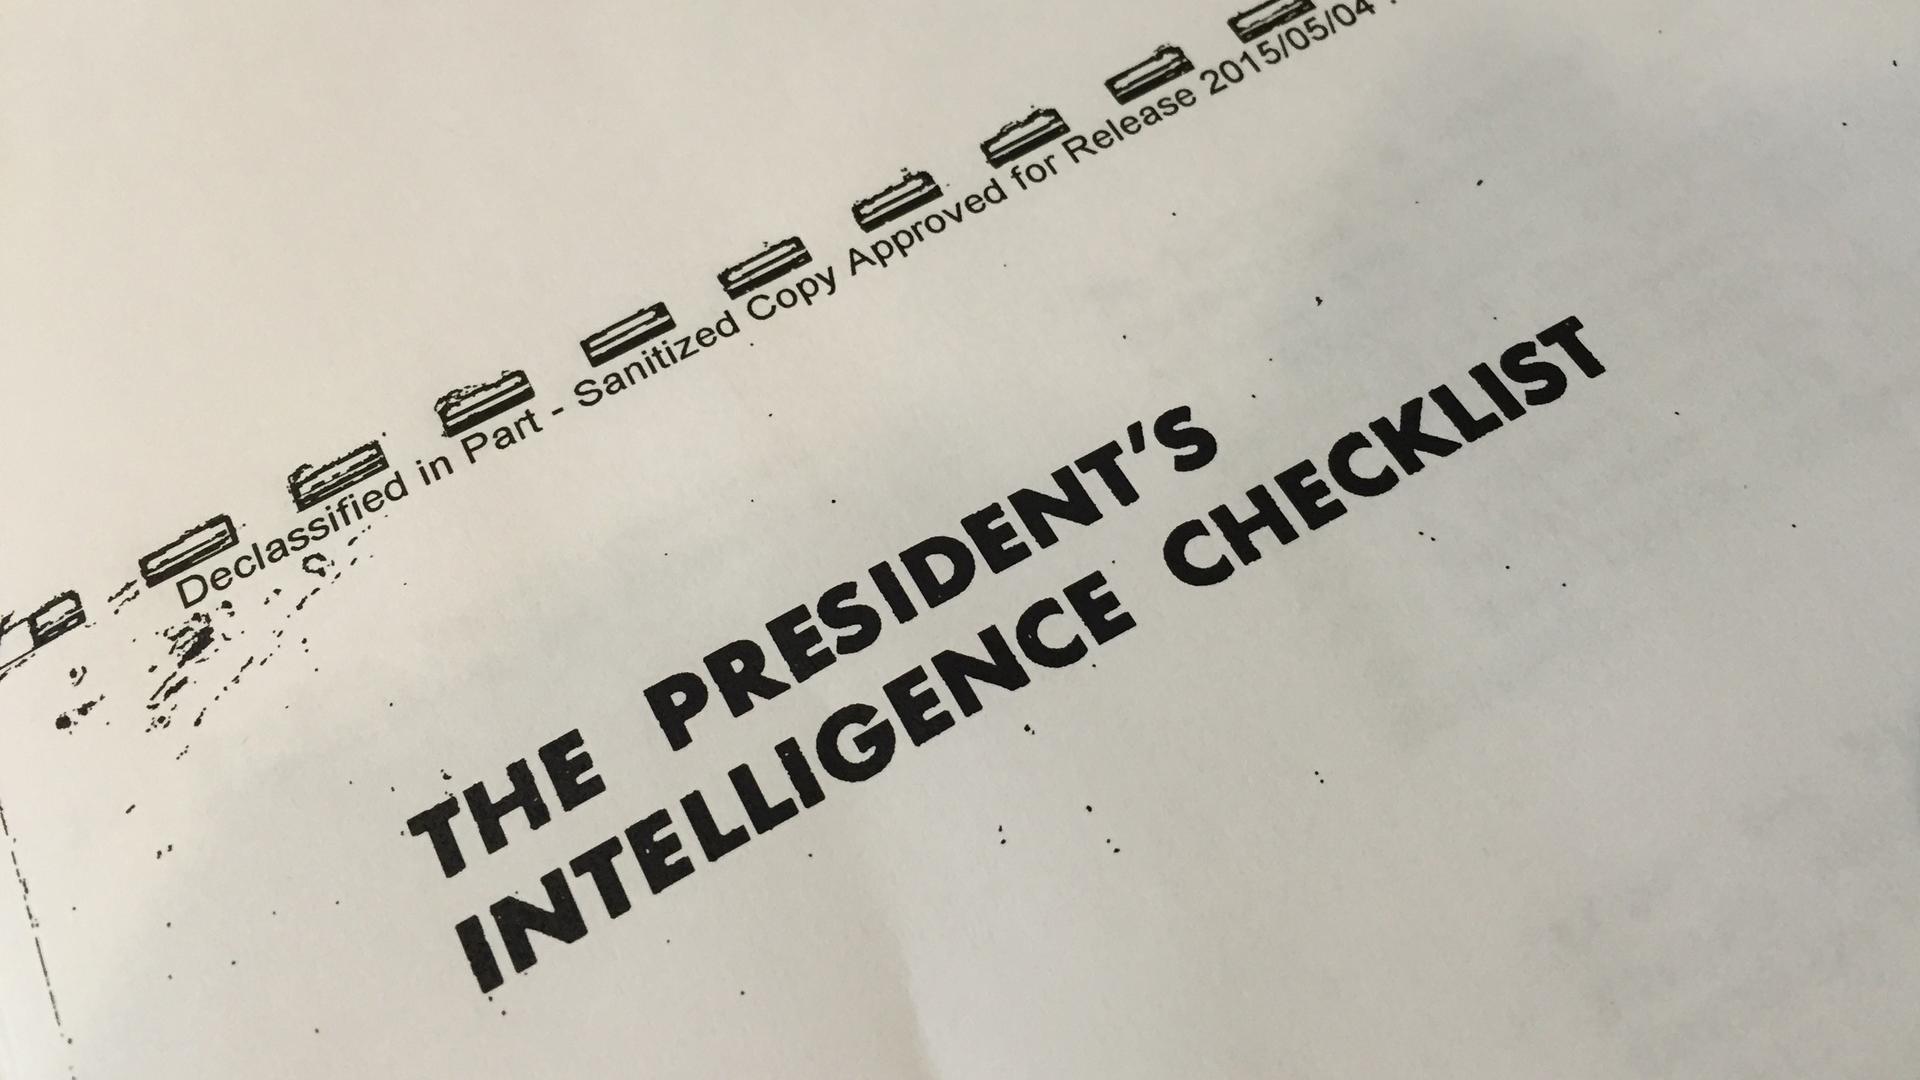 The first daily Presidential Intelligence Checklist, dated June 17th, 1961, and marked 'Top Secret, For the President's Eyes Only'